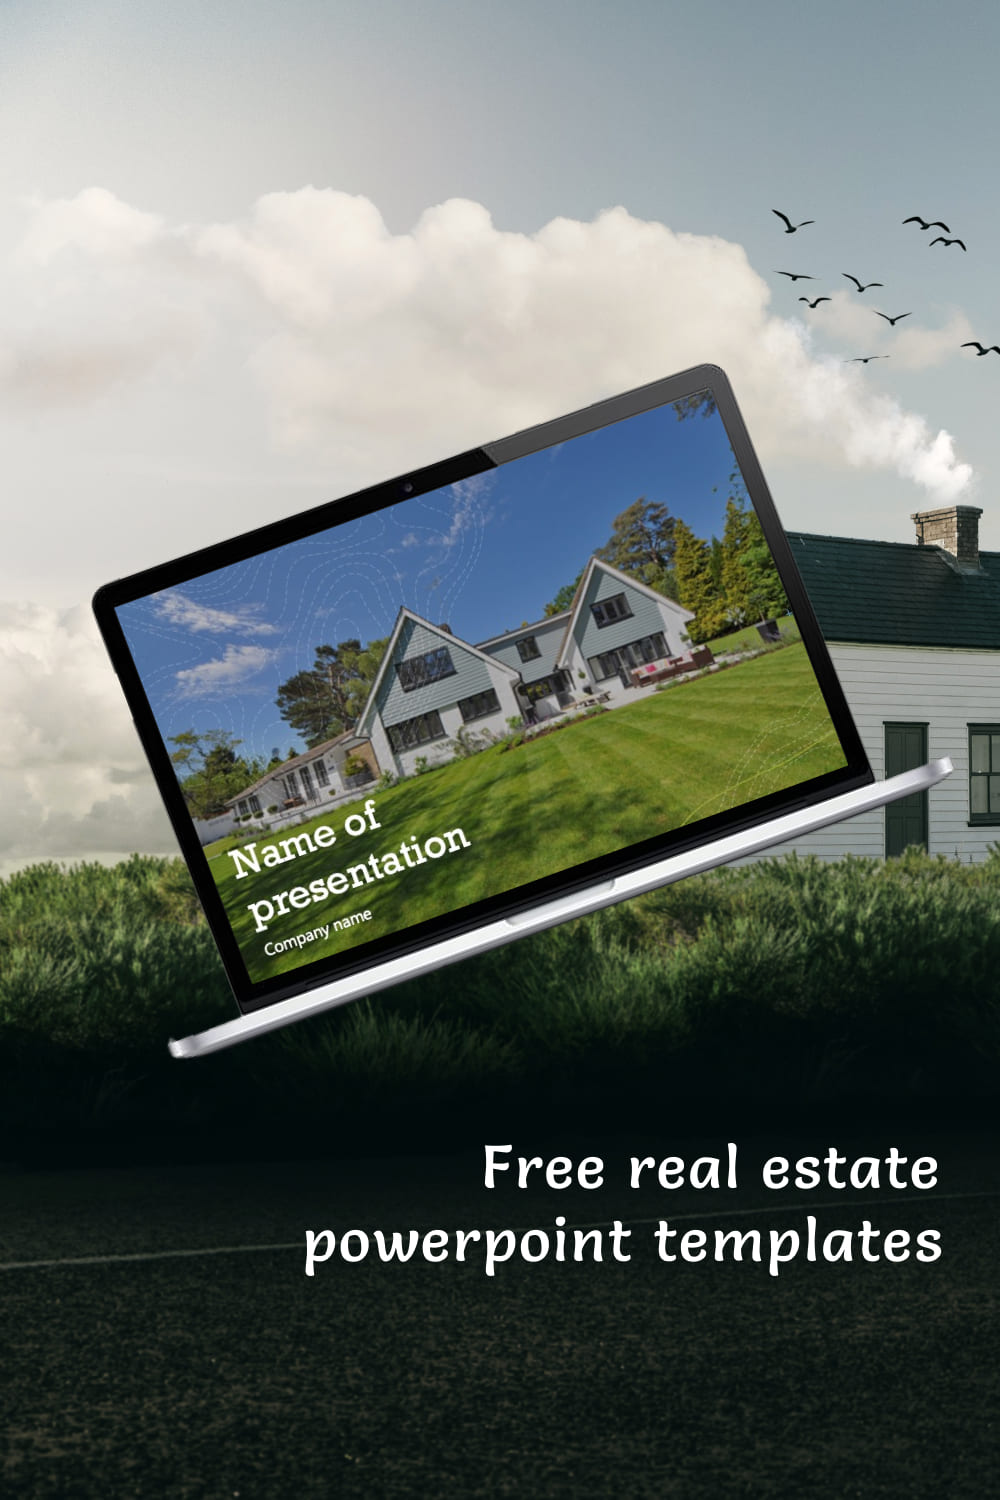 Pinterest Free Real Estate Powerpoint Templates.